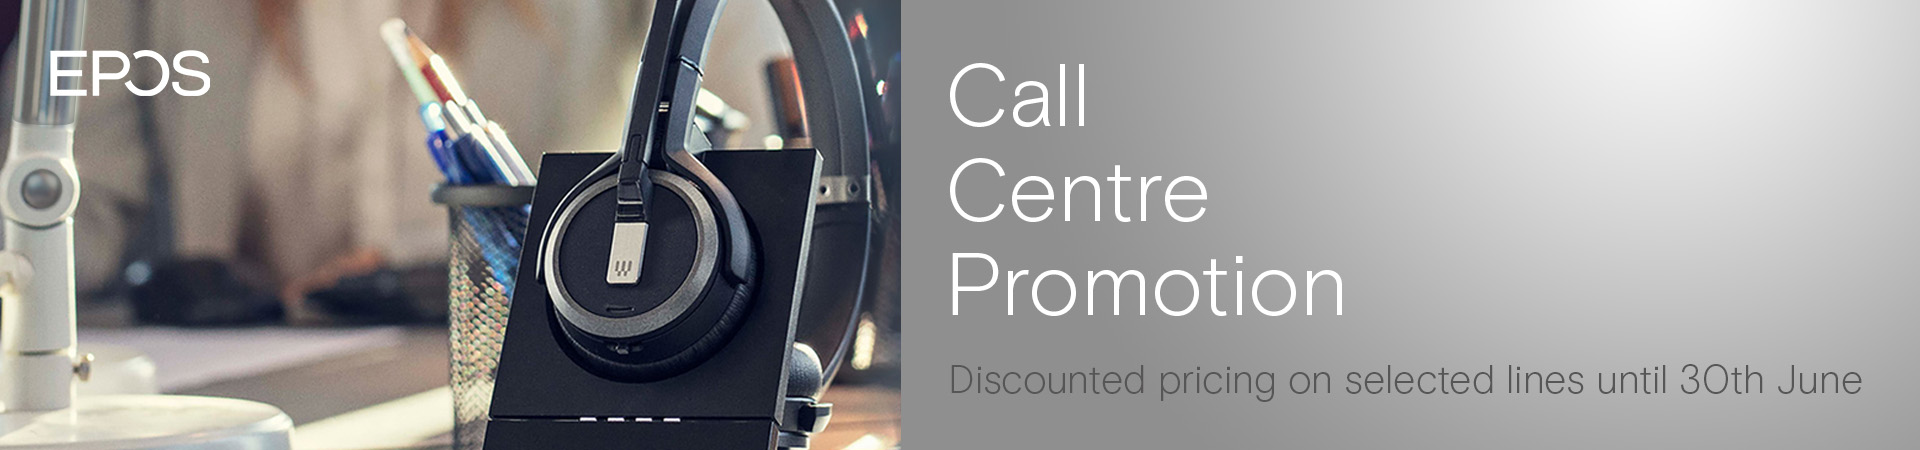 EPOS Call Centre Promotion - Discounted pricing on selected lines until 30th June